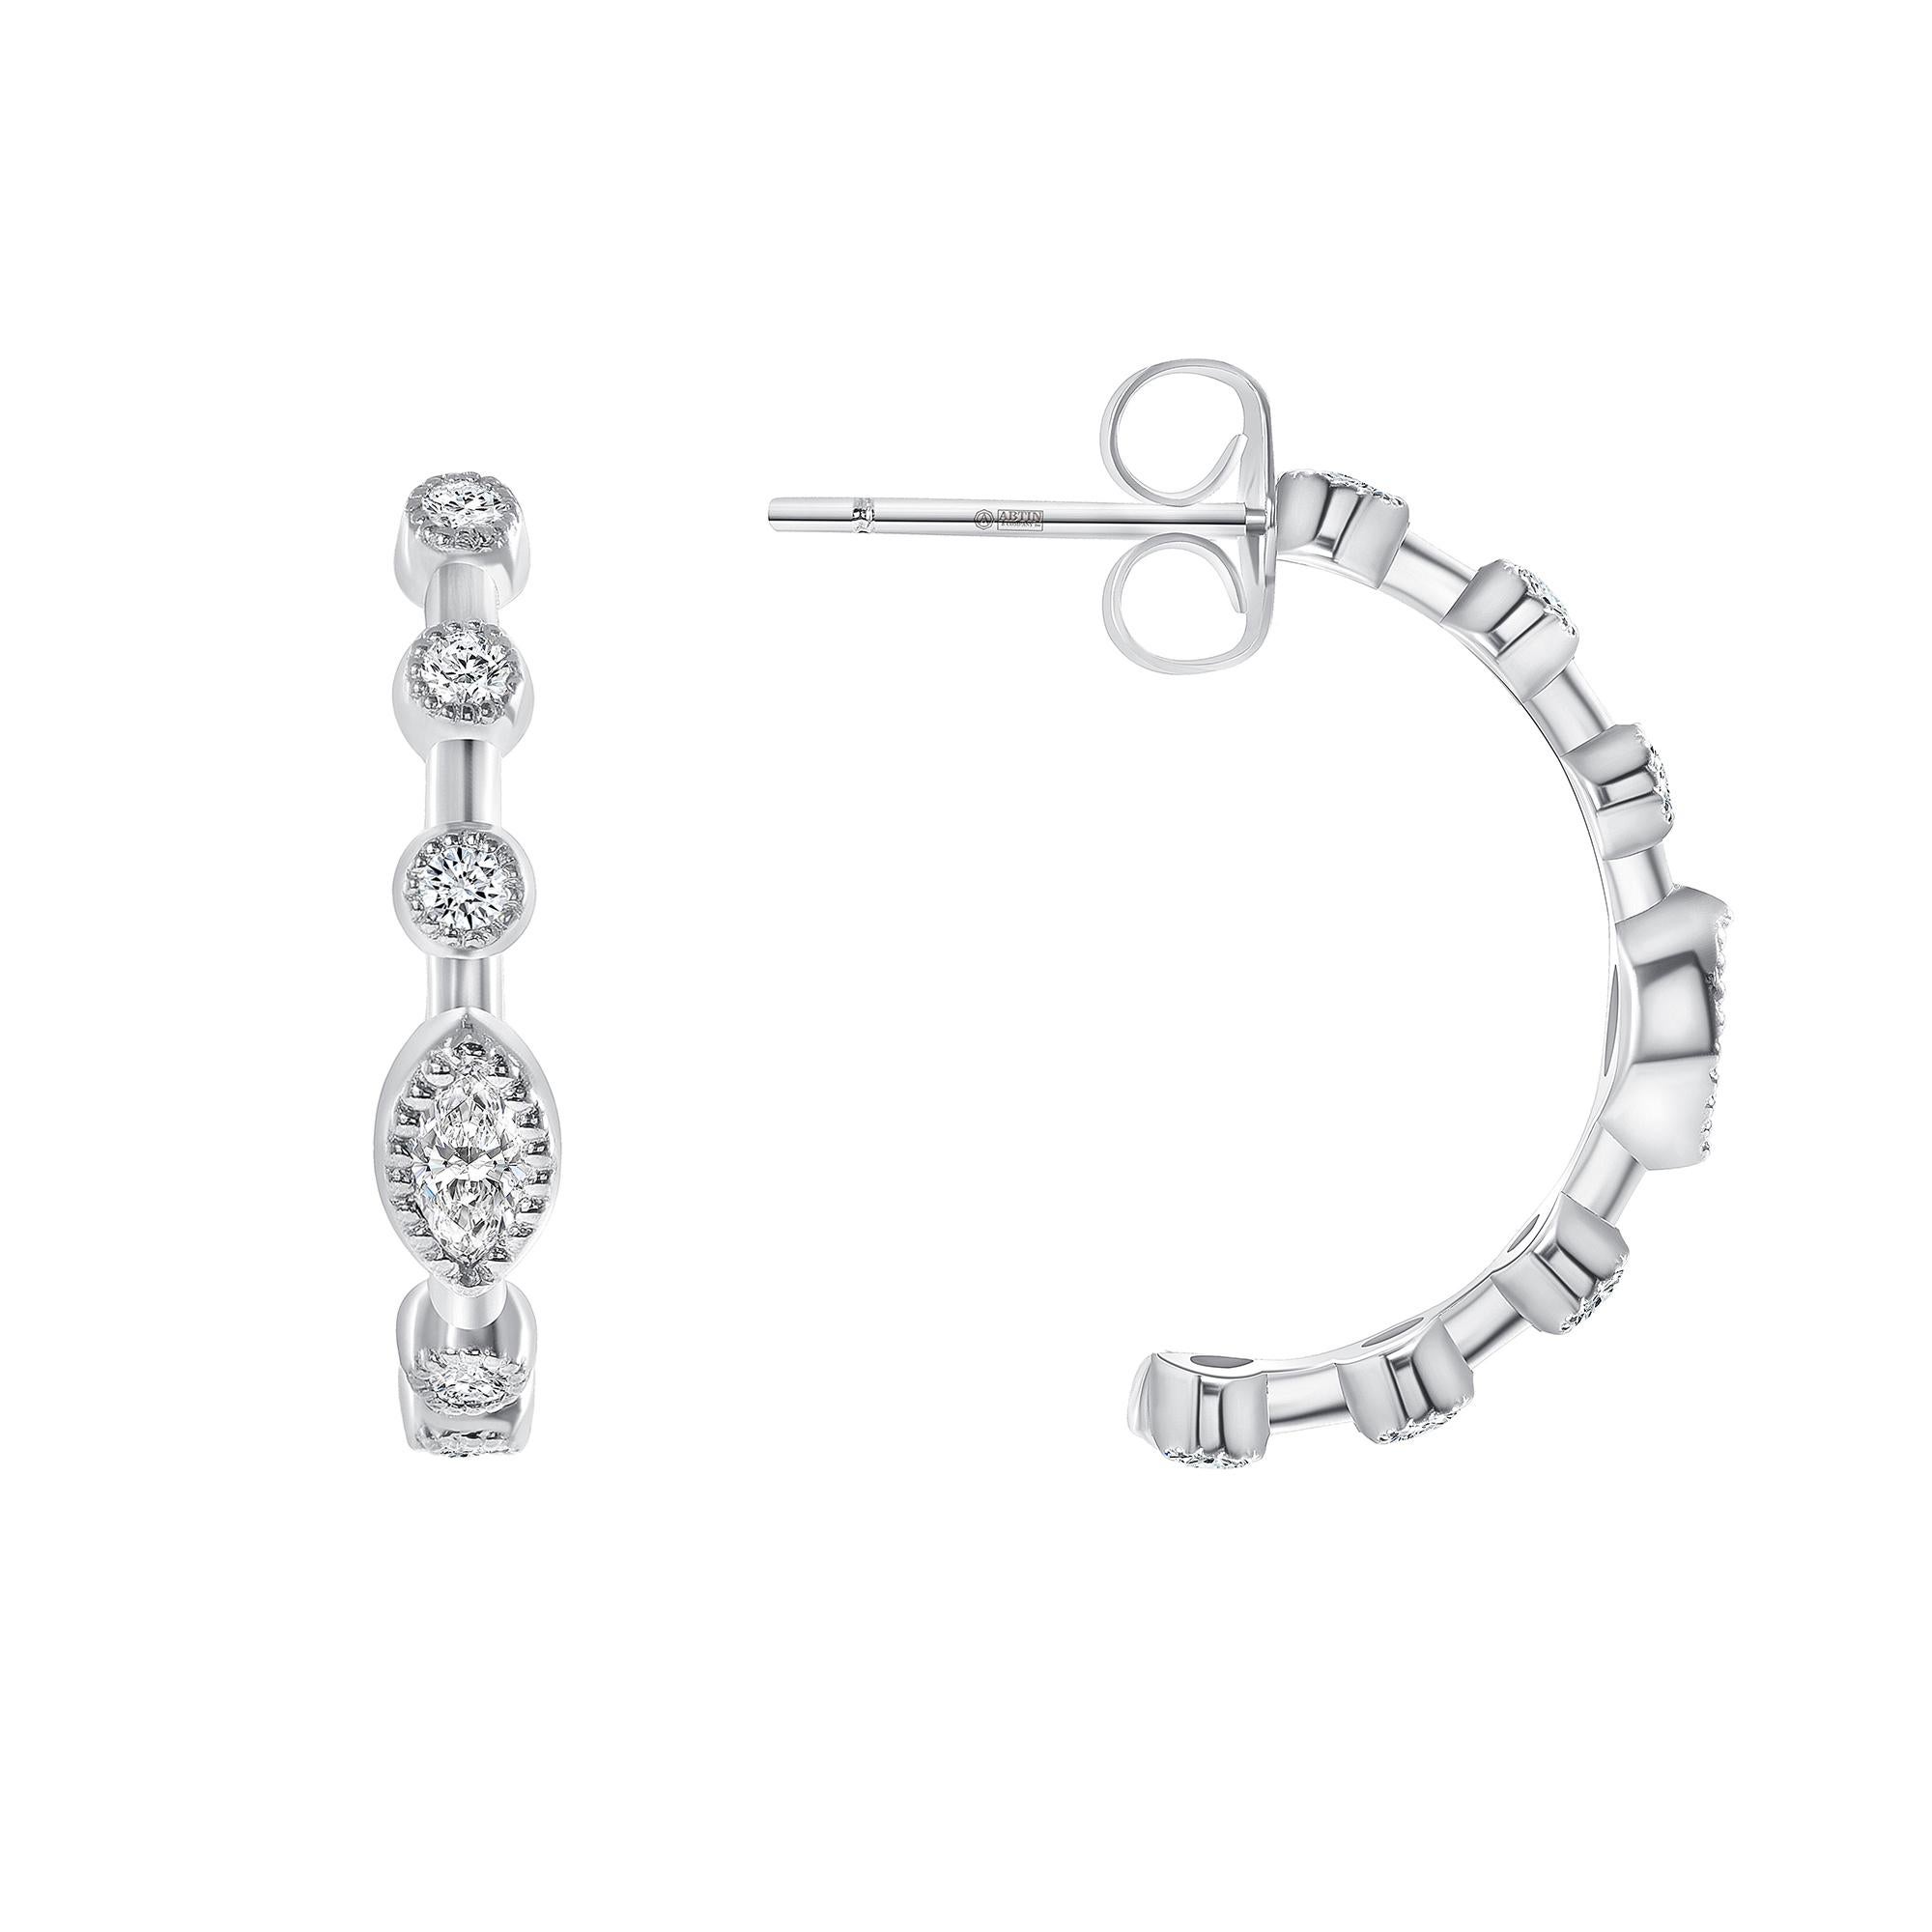  Enhance your style with this eye-catching hoop earring adorned with dazzling marquise diamonds complemented by glossy bezel-set round diamonds in elegant 14K gold.
Gold Weight: 2.00 gr.
Diamond Weight: 0.40 ct
Available in white, yellow, and rose